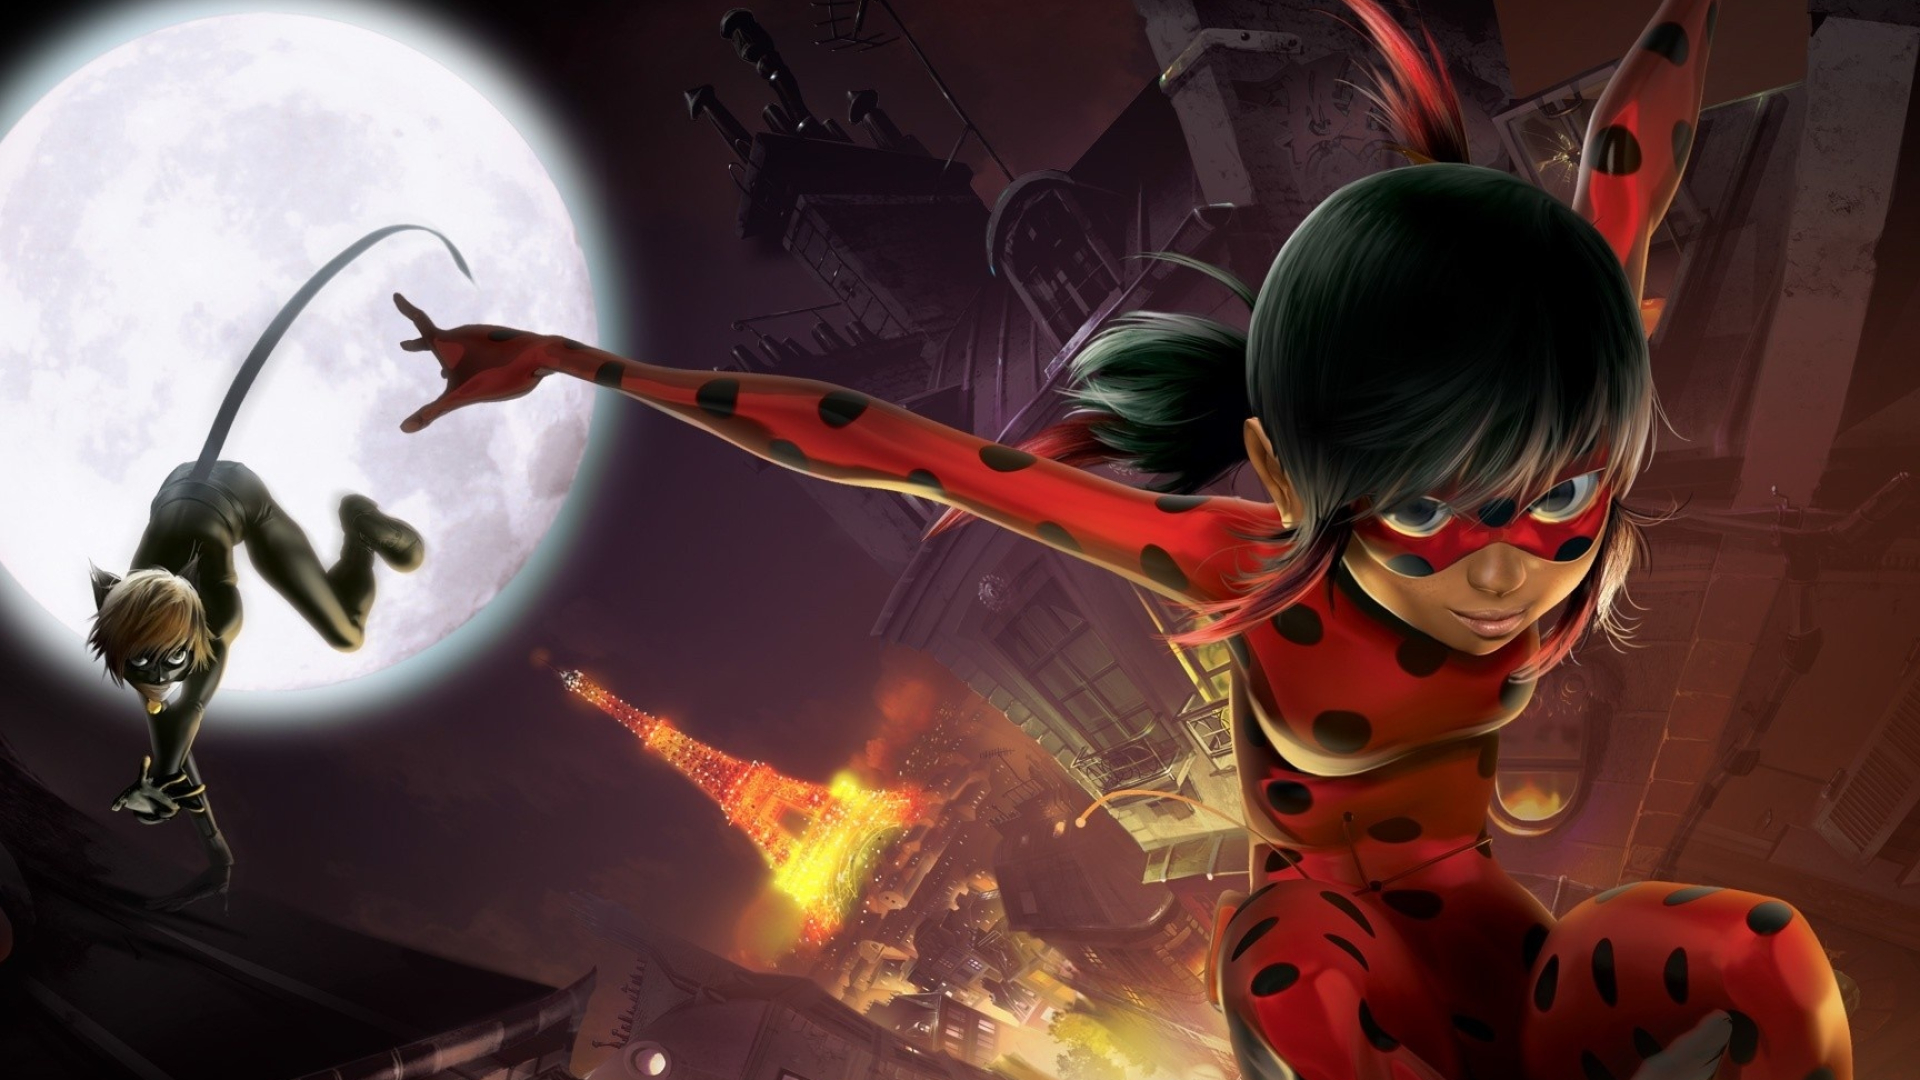 19 miraculous ladybug wallpapers, Vibrant and lively, Superhero team, Exciting adventures, 1920x1080 Full HD Desktop